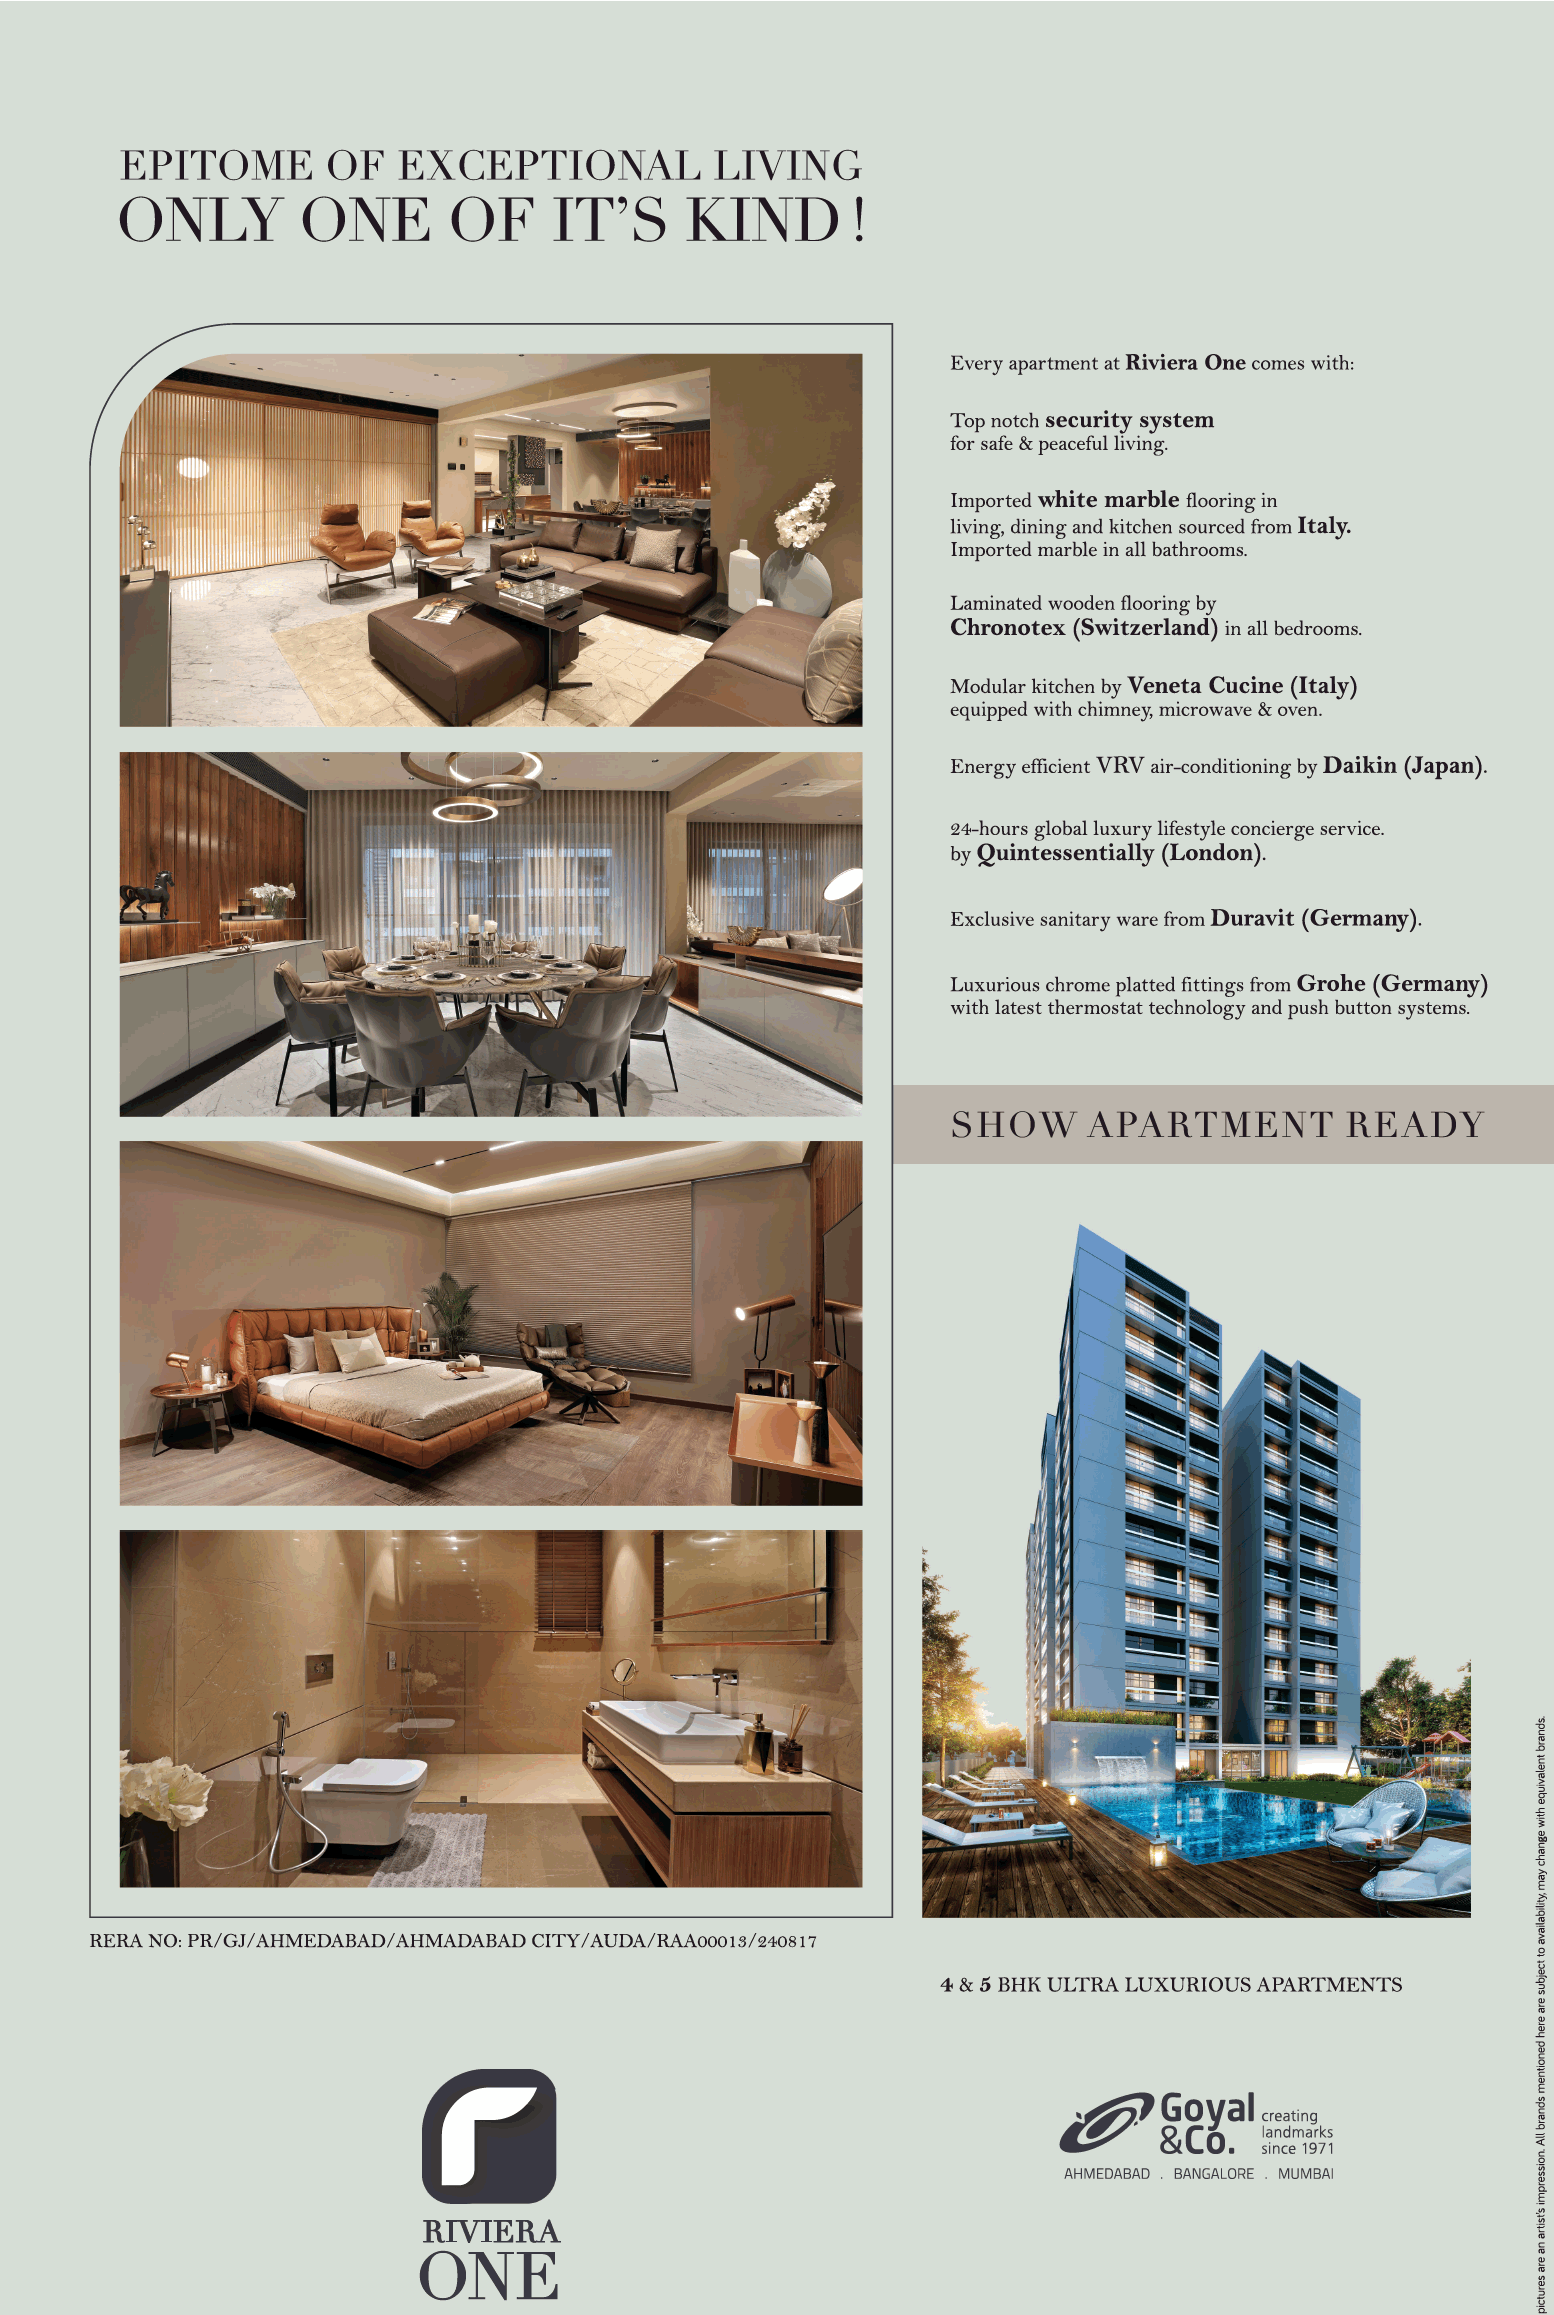 Presenting 4 & 5 bhk ultra luxurious apartments at Goyal Riviera One in Ahmedabad